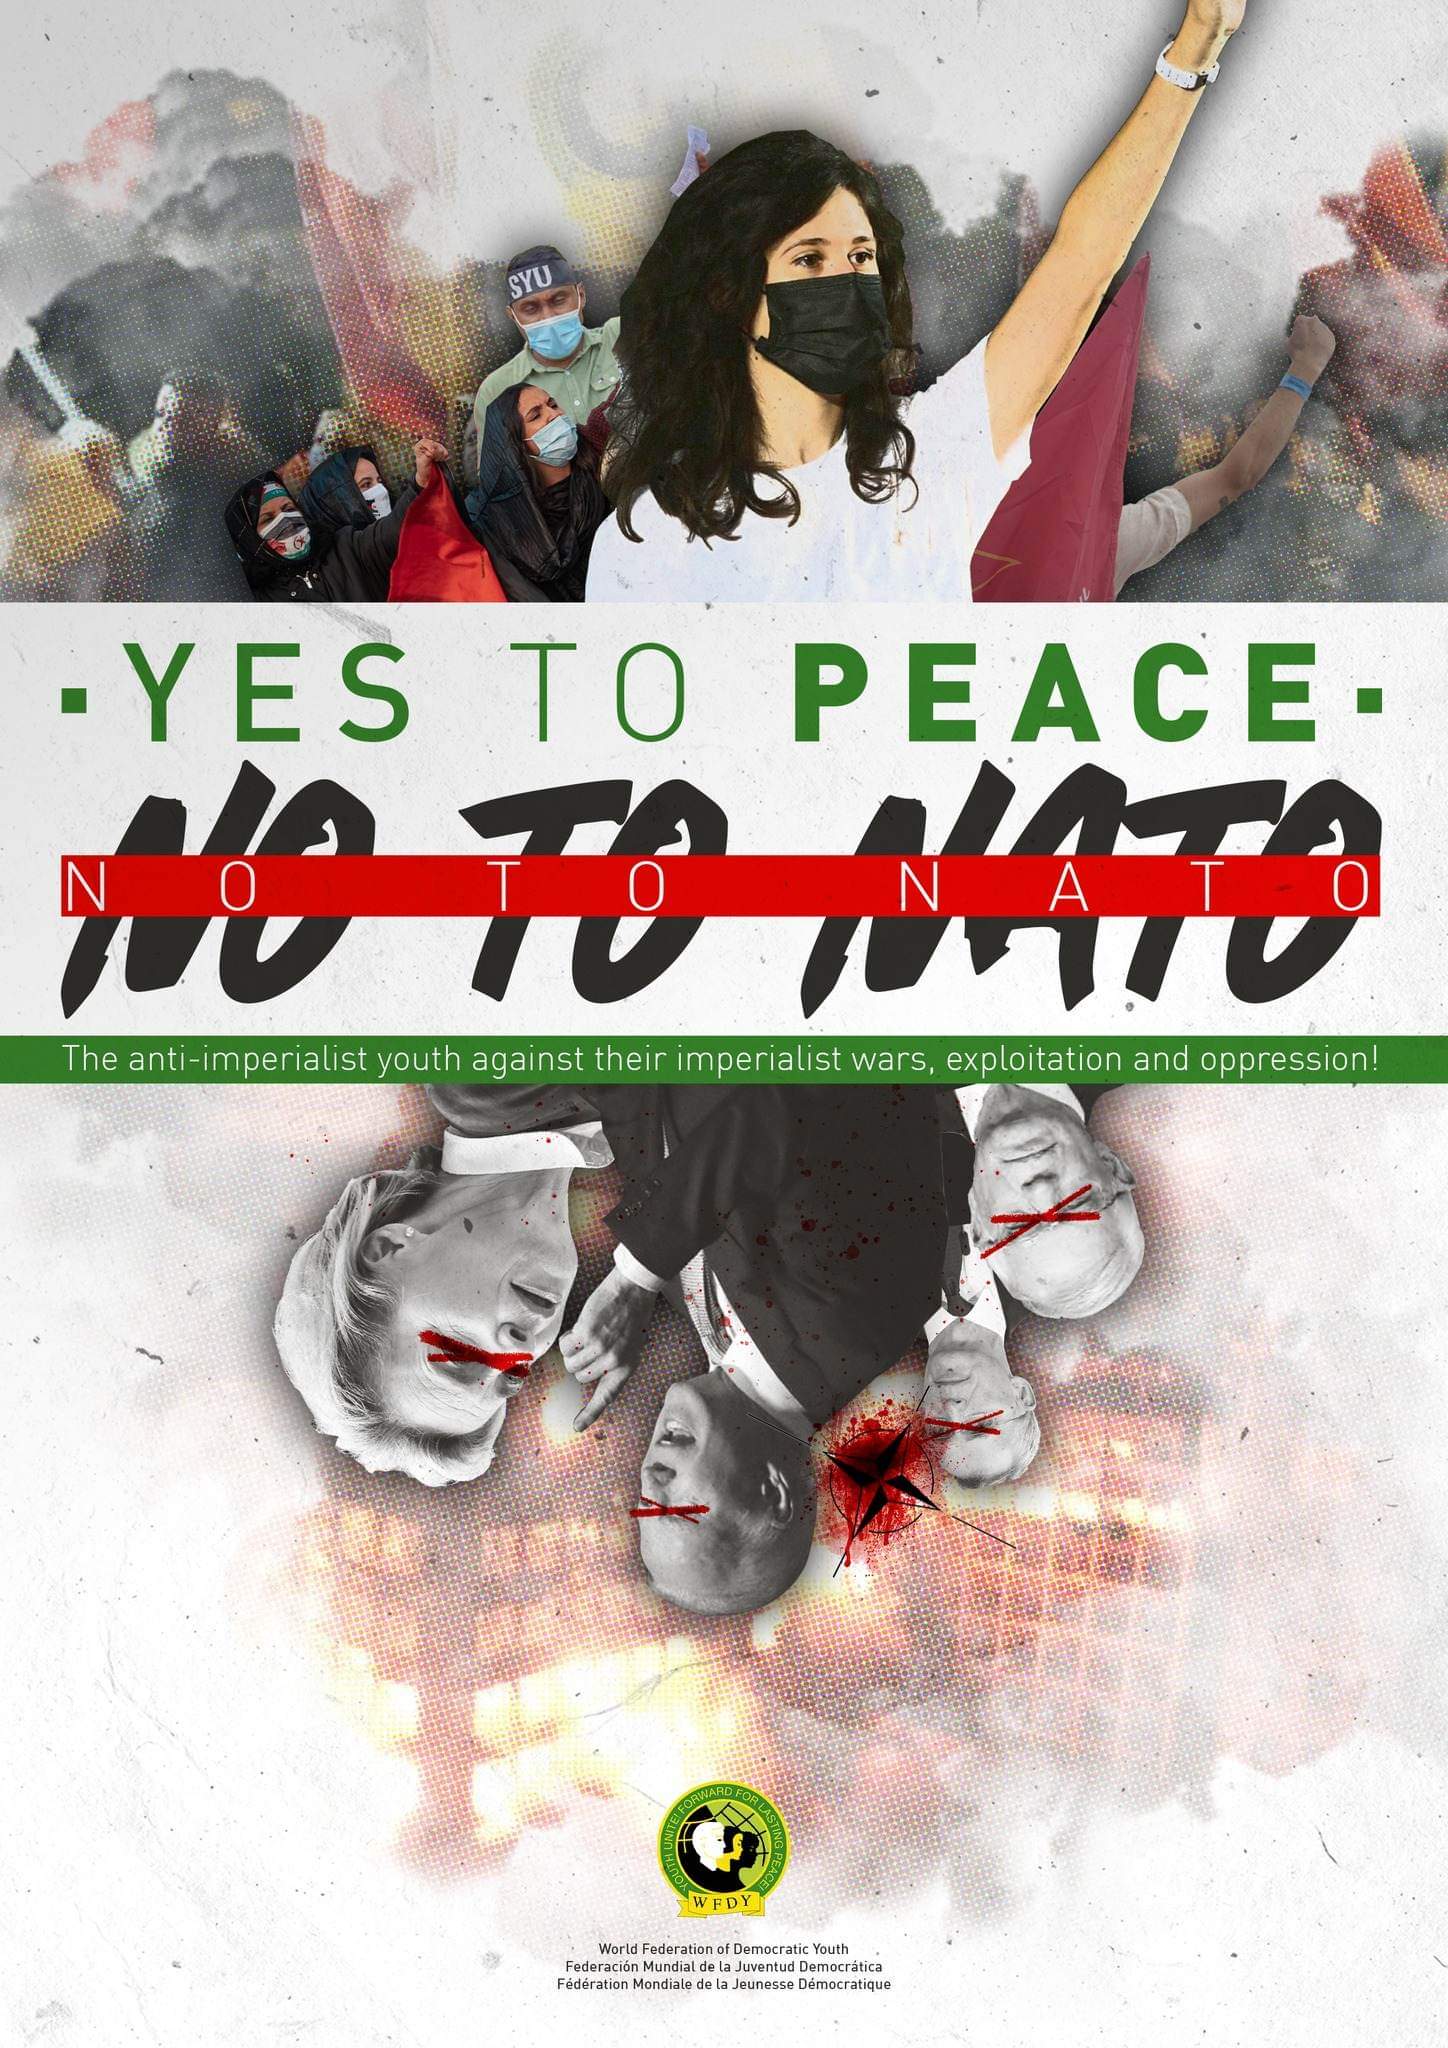 CENA Webinar – “Yes to Peace! No to NATO!” The impact of the current escalation of militarism and warmongering